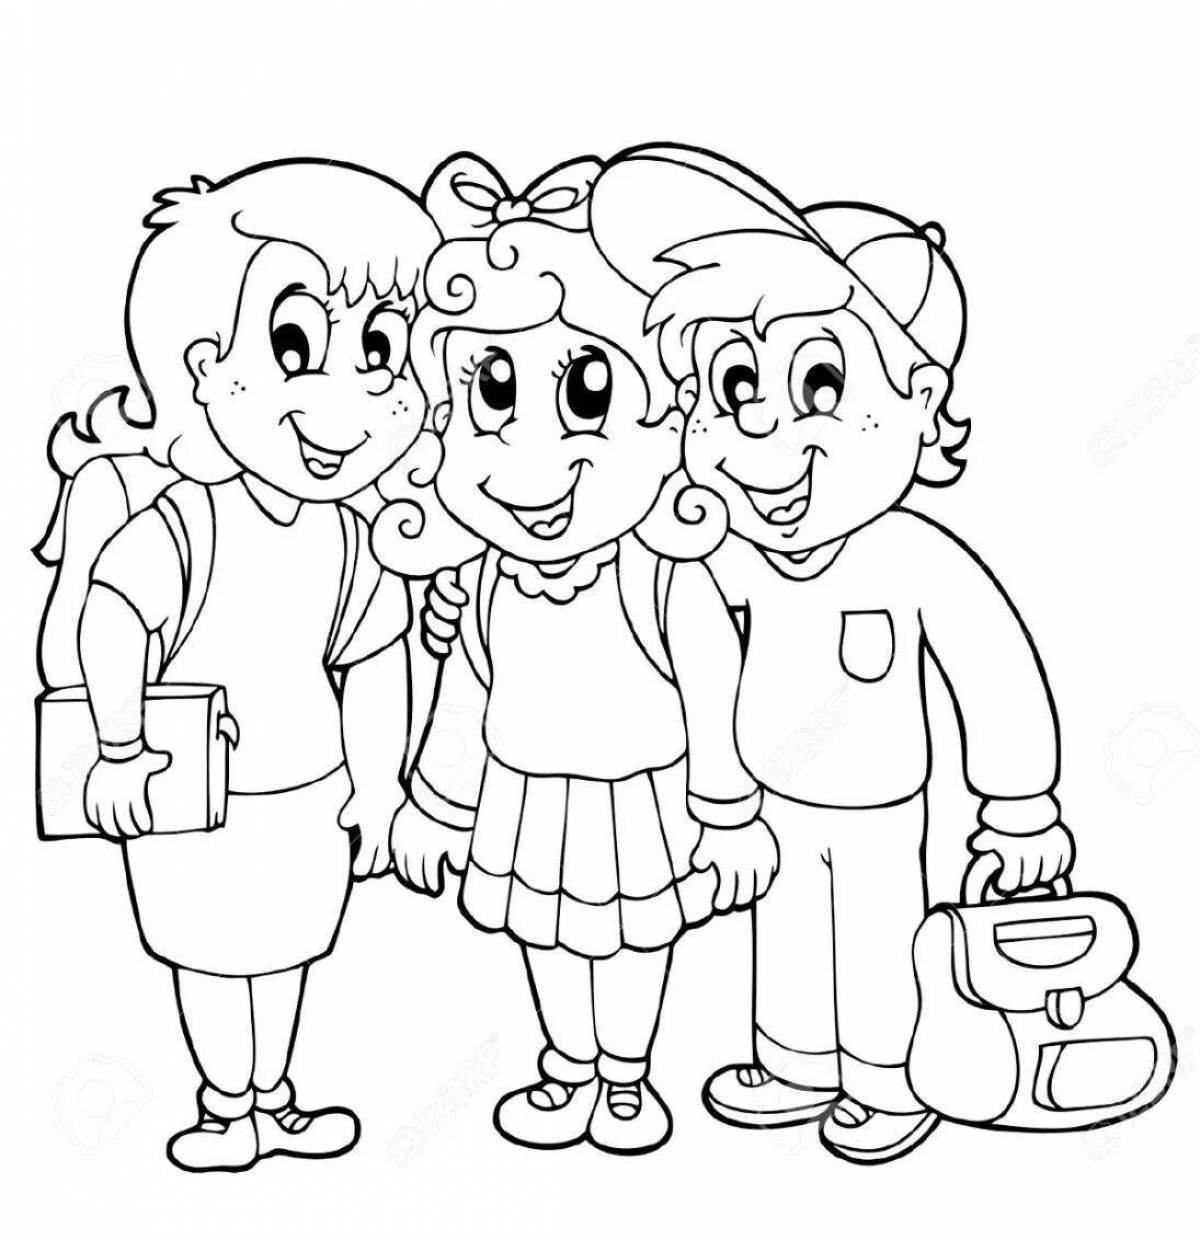 Caring friendship coloring page